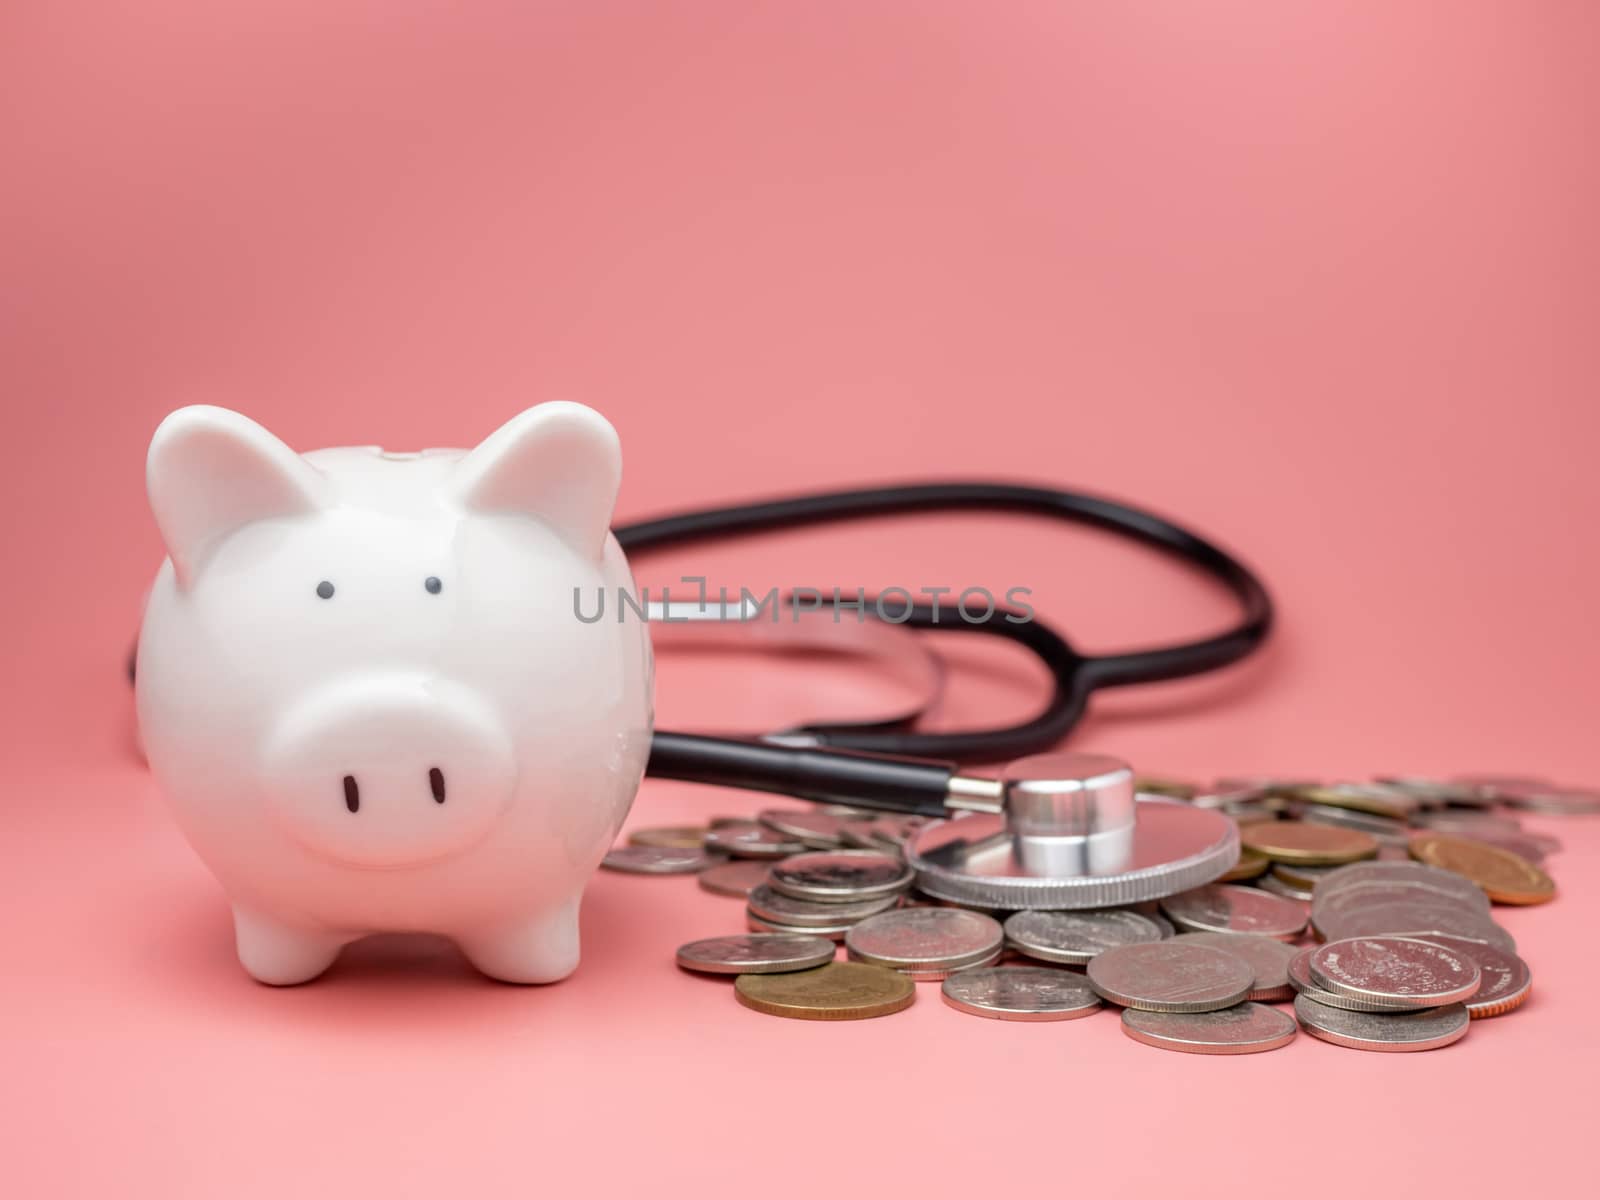 Stethoscope on the pile of money and piggy bank on pink background.
Financial health check concept, debt and finance crisis.